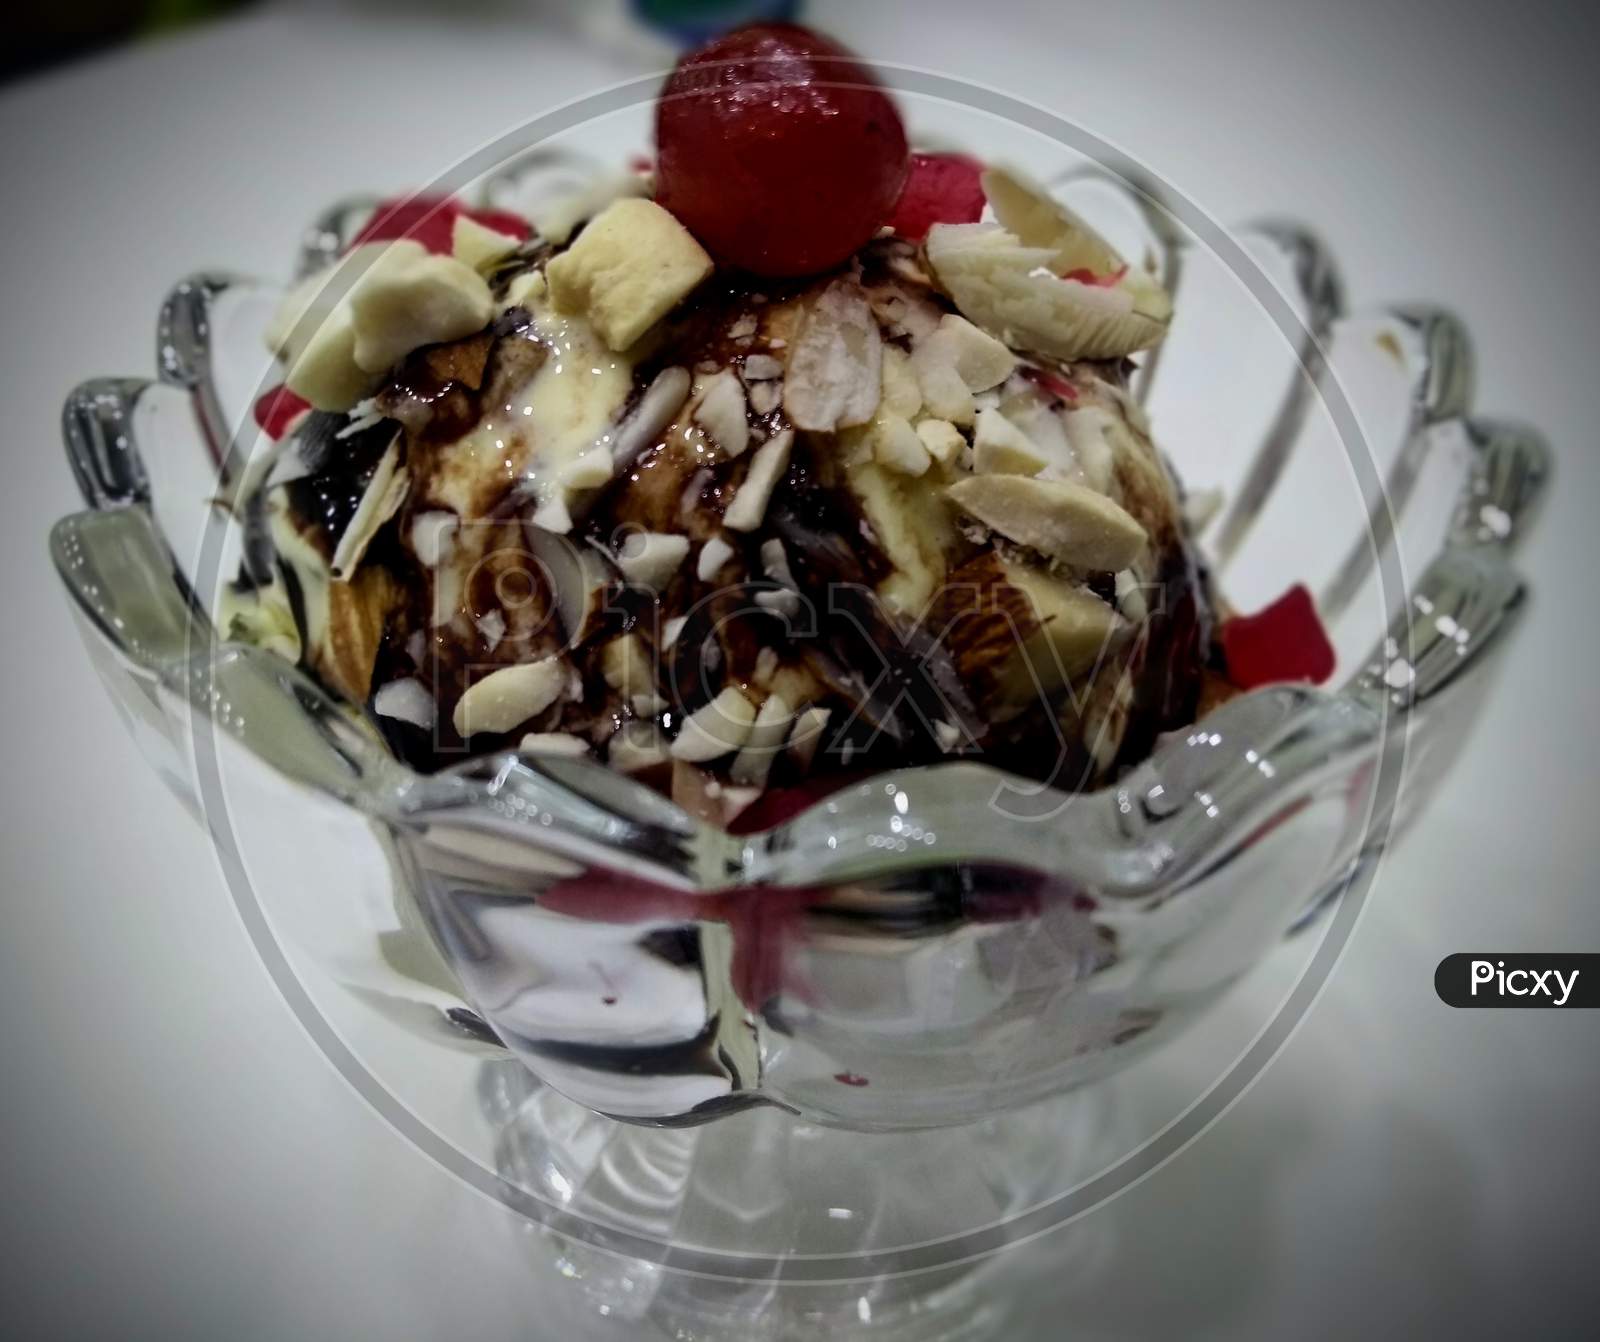 Ice cream with dry fruit toppings